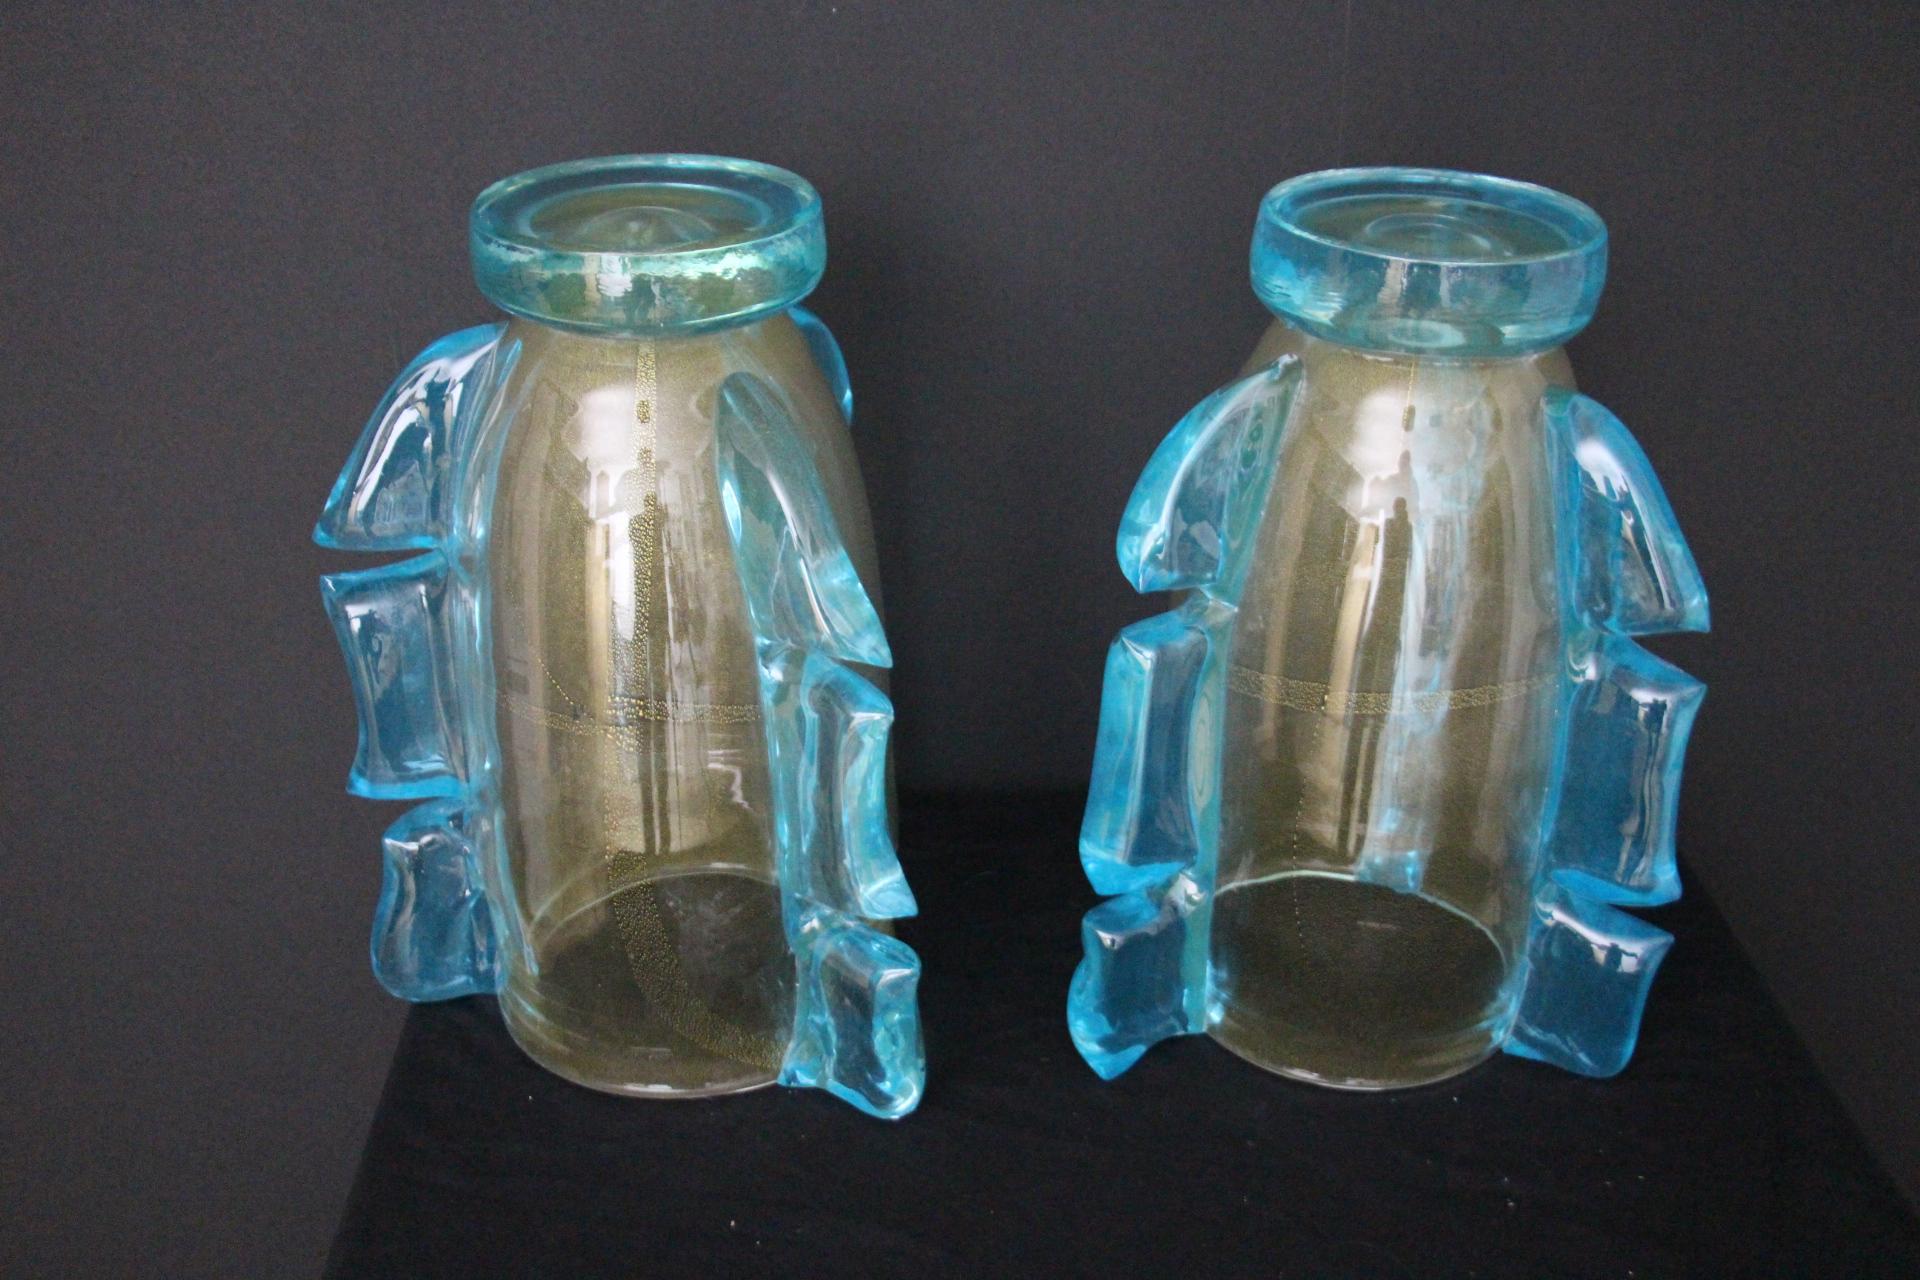 Pair of Large Golden And Turquoise Blue Murano Glass Vases by Costantini For Sale 6